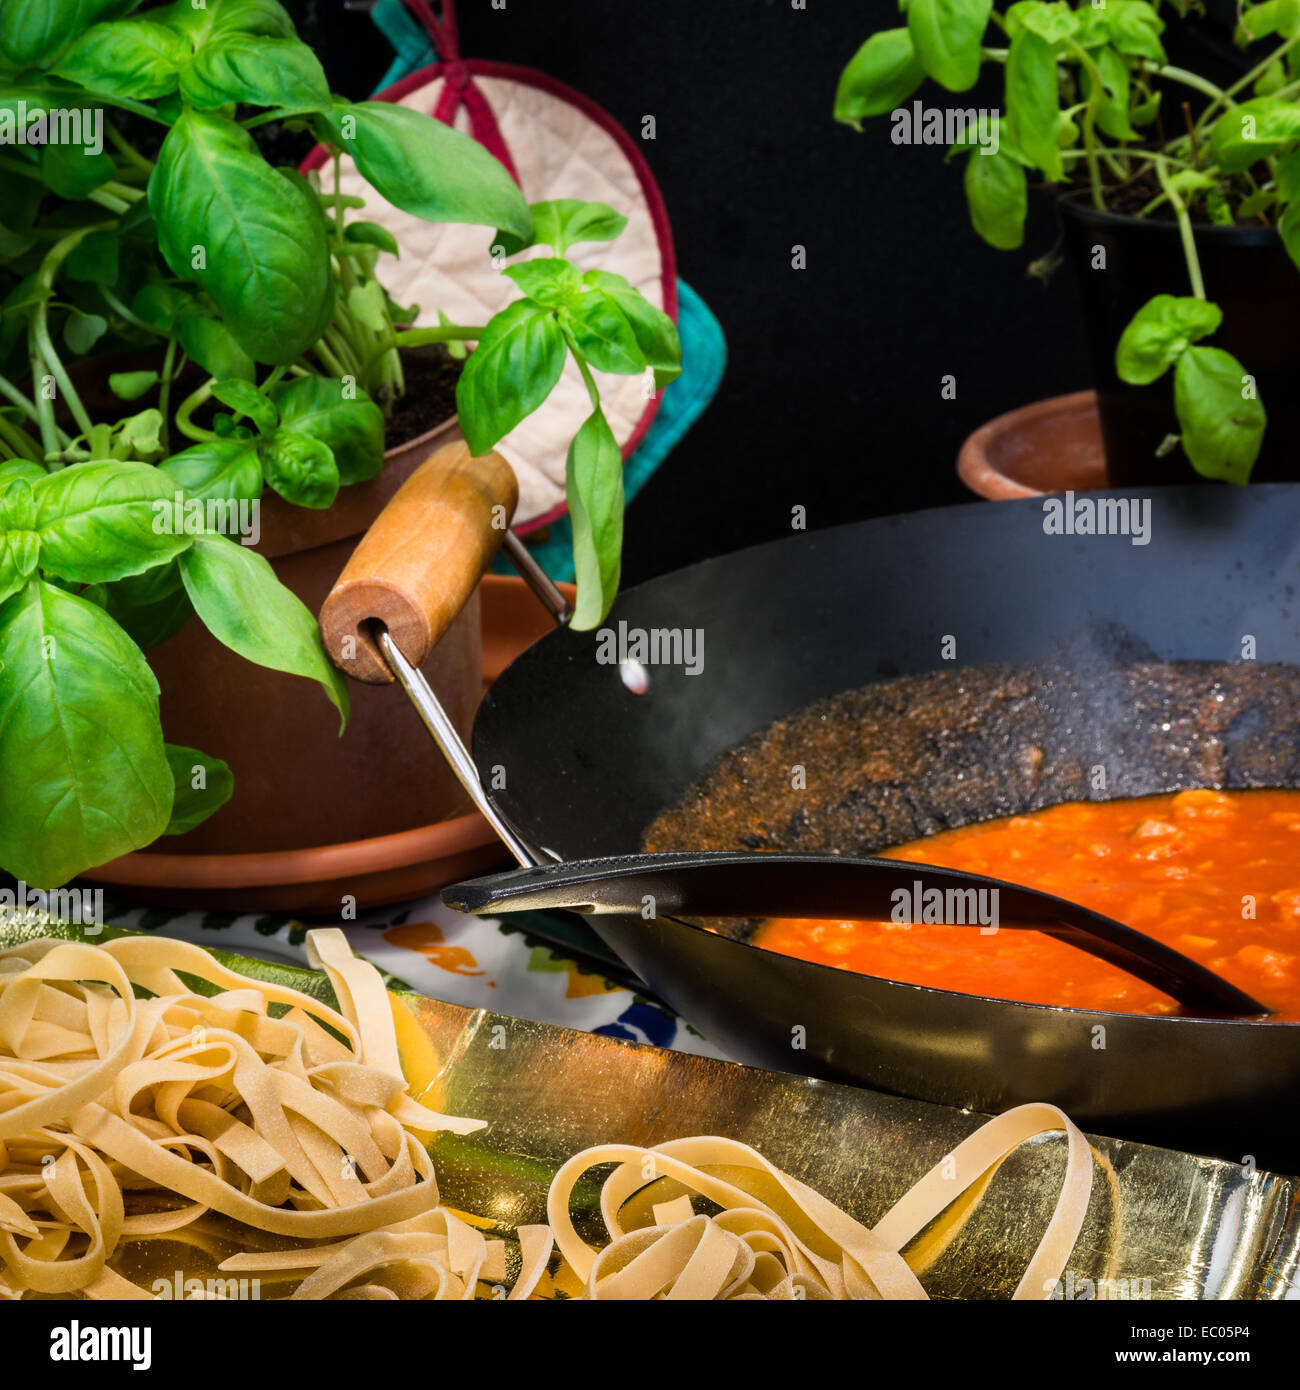 Fettuccine or tagliatelle cut ready to cook and sauce bolognese Stock Photo